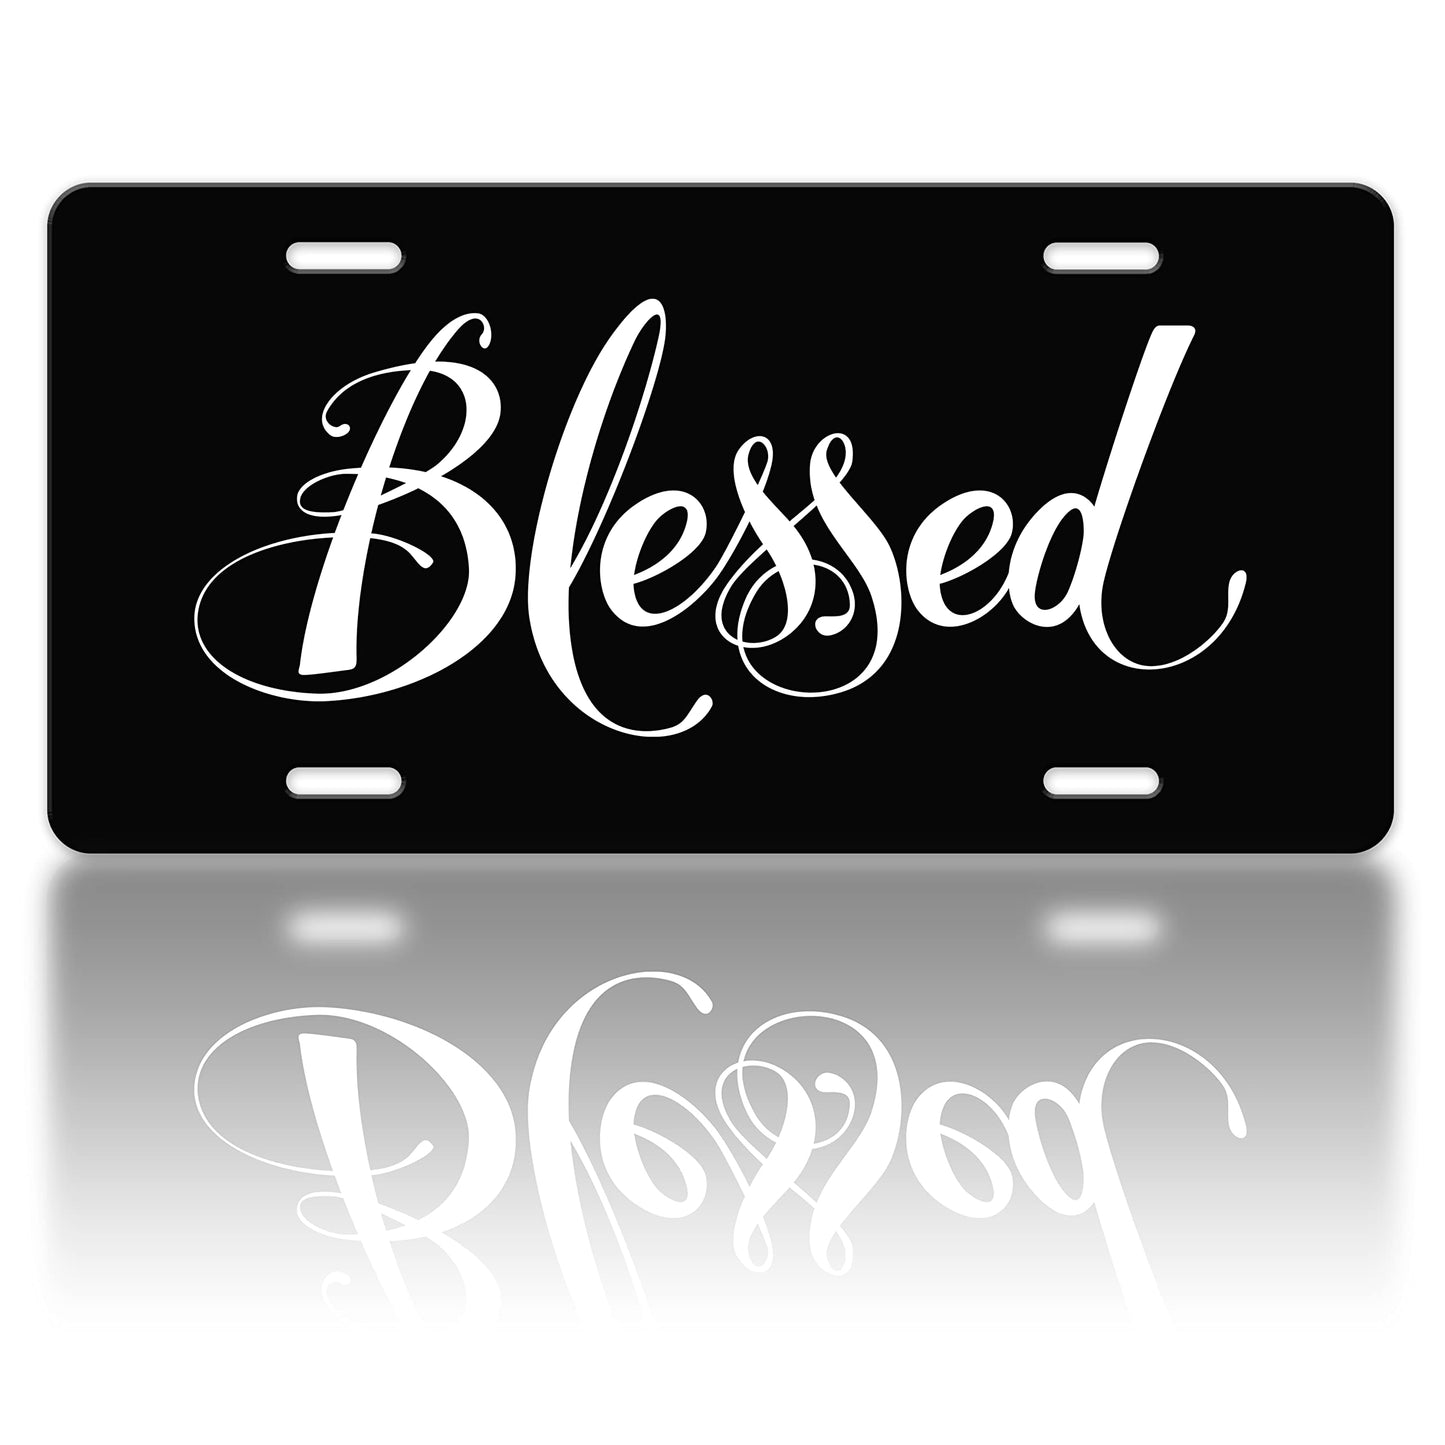 Blessed Christian Front License Plate 12 X 6 claimedbygoddesigns